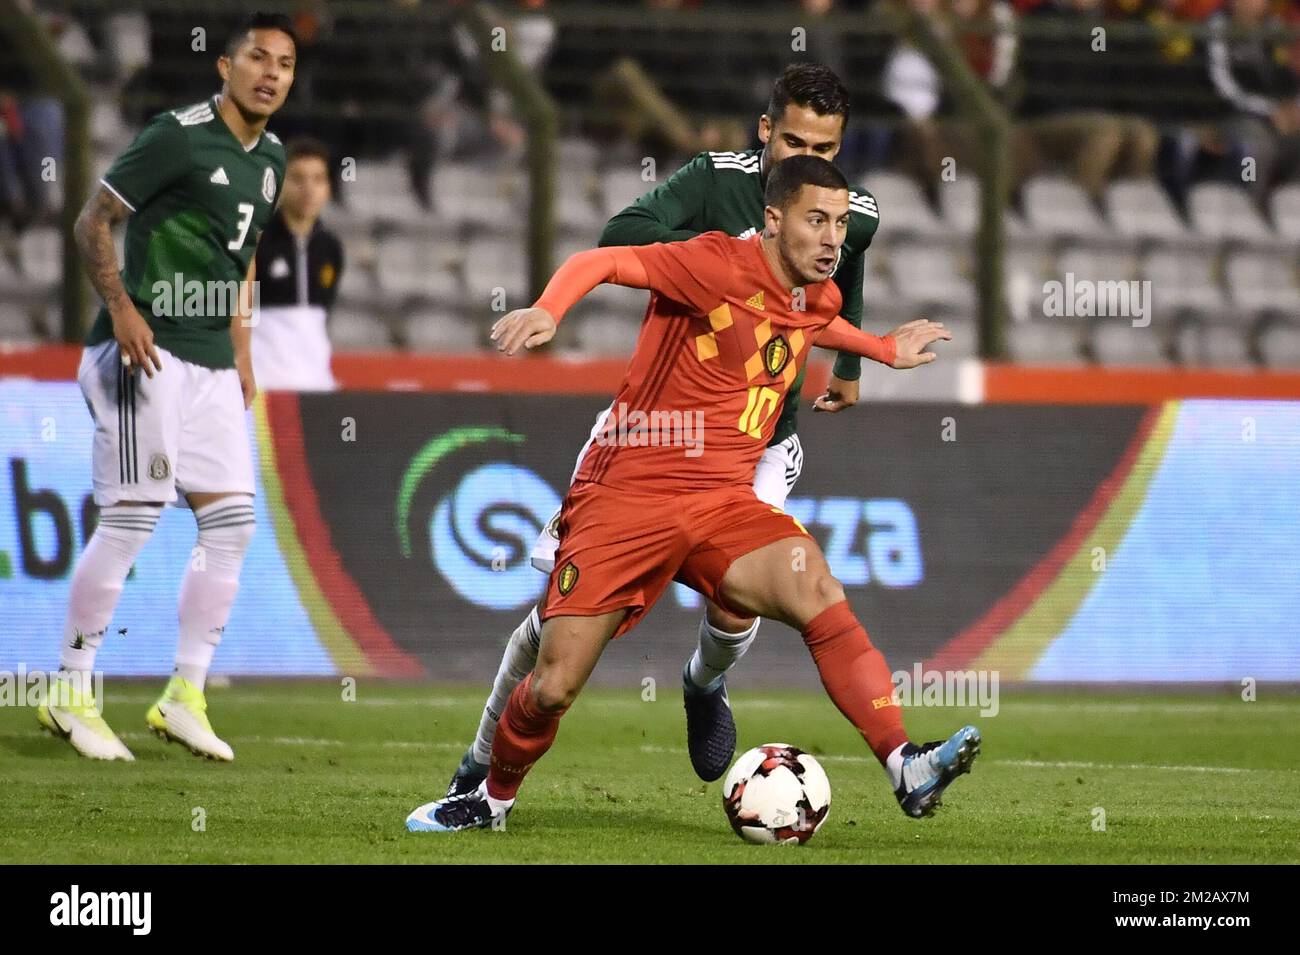 Belgium's Eden Hazard and Mexico's Diego Reyes fight for the ball during a friendly soccer game between Belgian national team Red Devils and Mexico, Friday 10 November 2017, in Brugge. BELGA PHOTO DIRK WAEM  Stock Photo